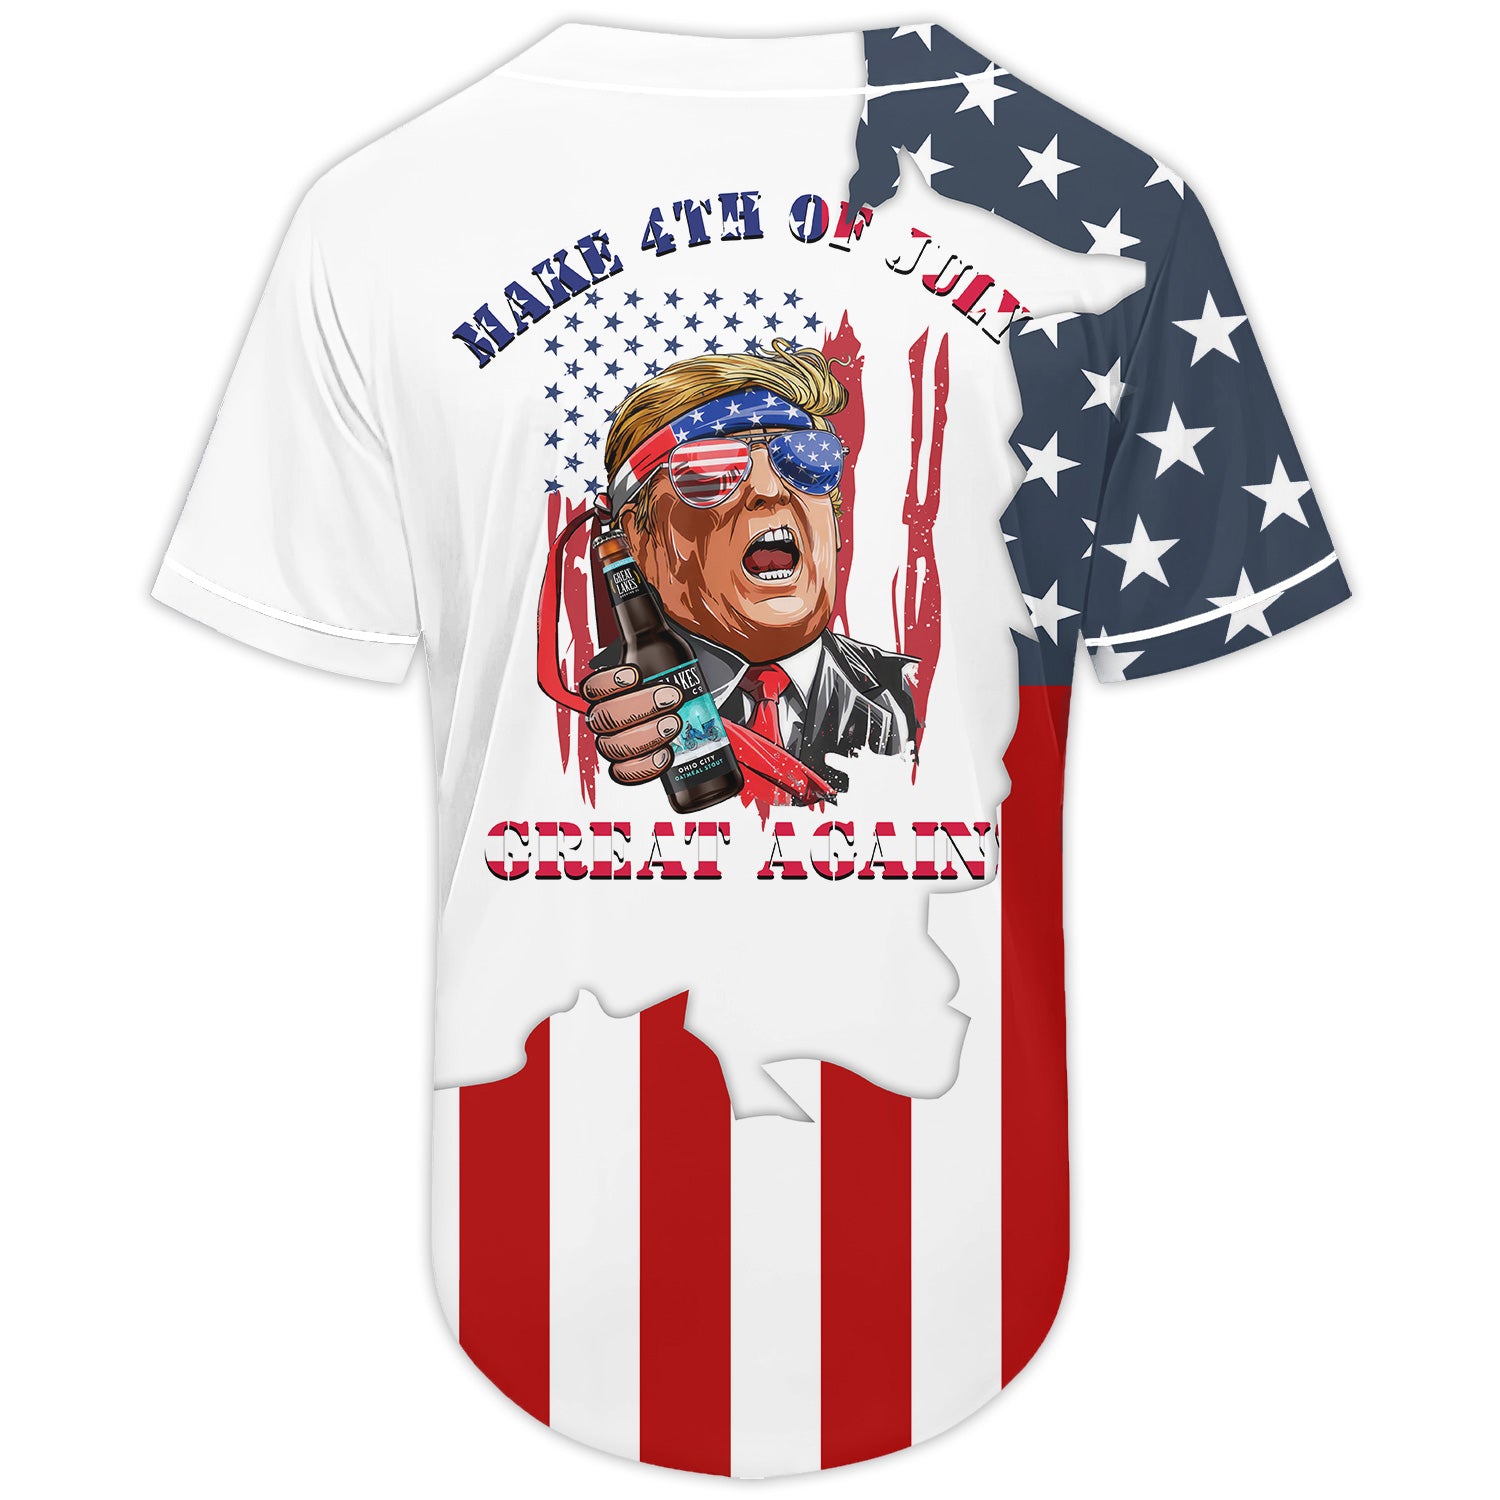 Great Lakes Donald Trump Independence Day Baseball Jersey